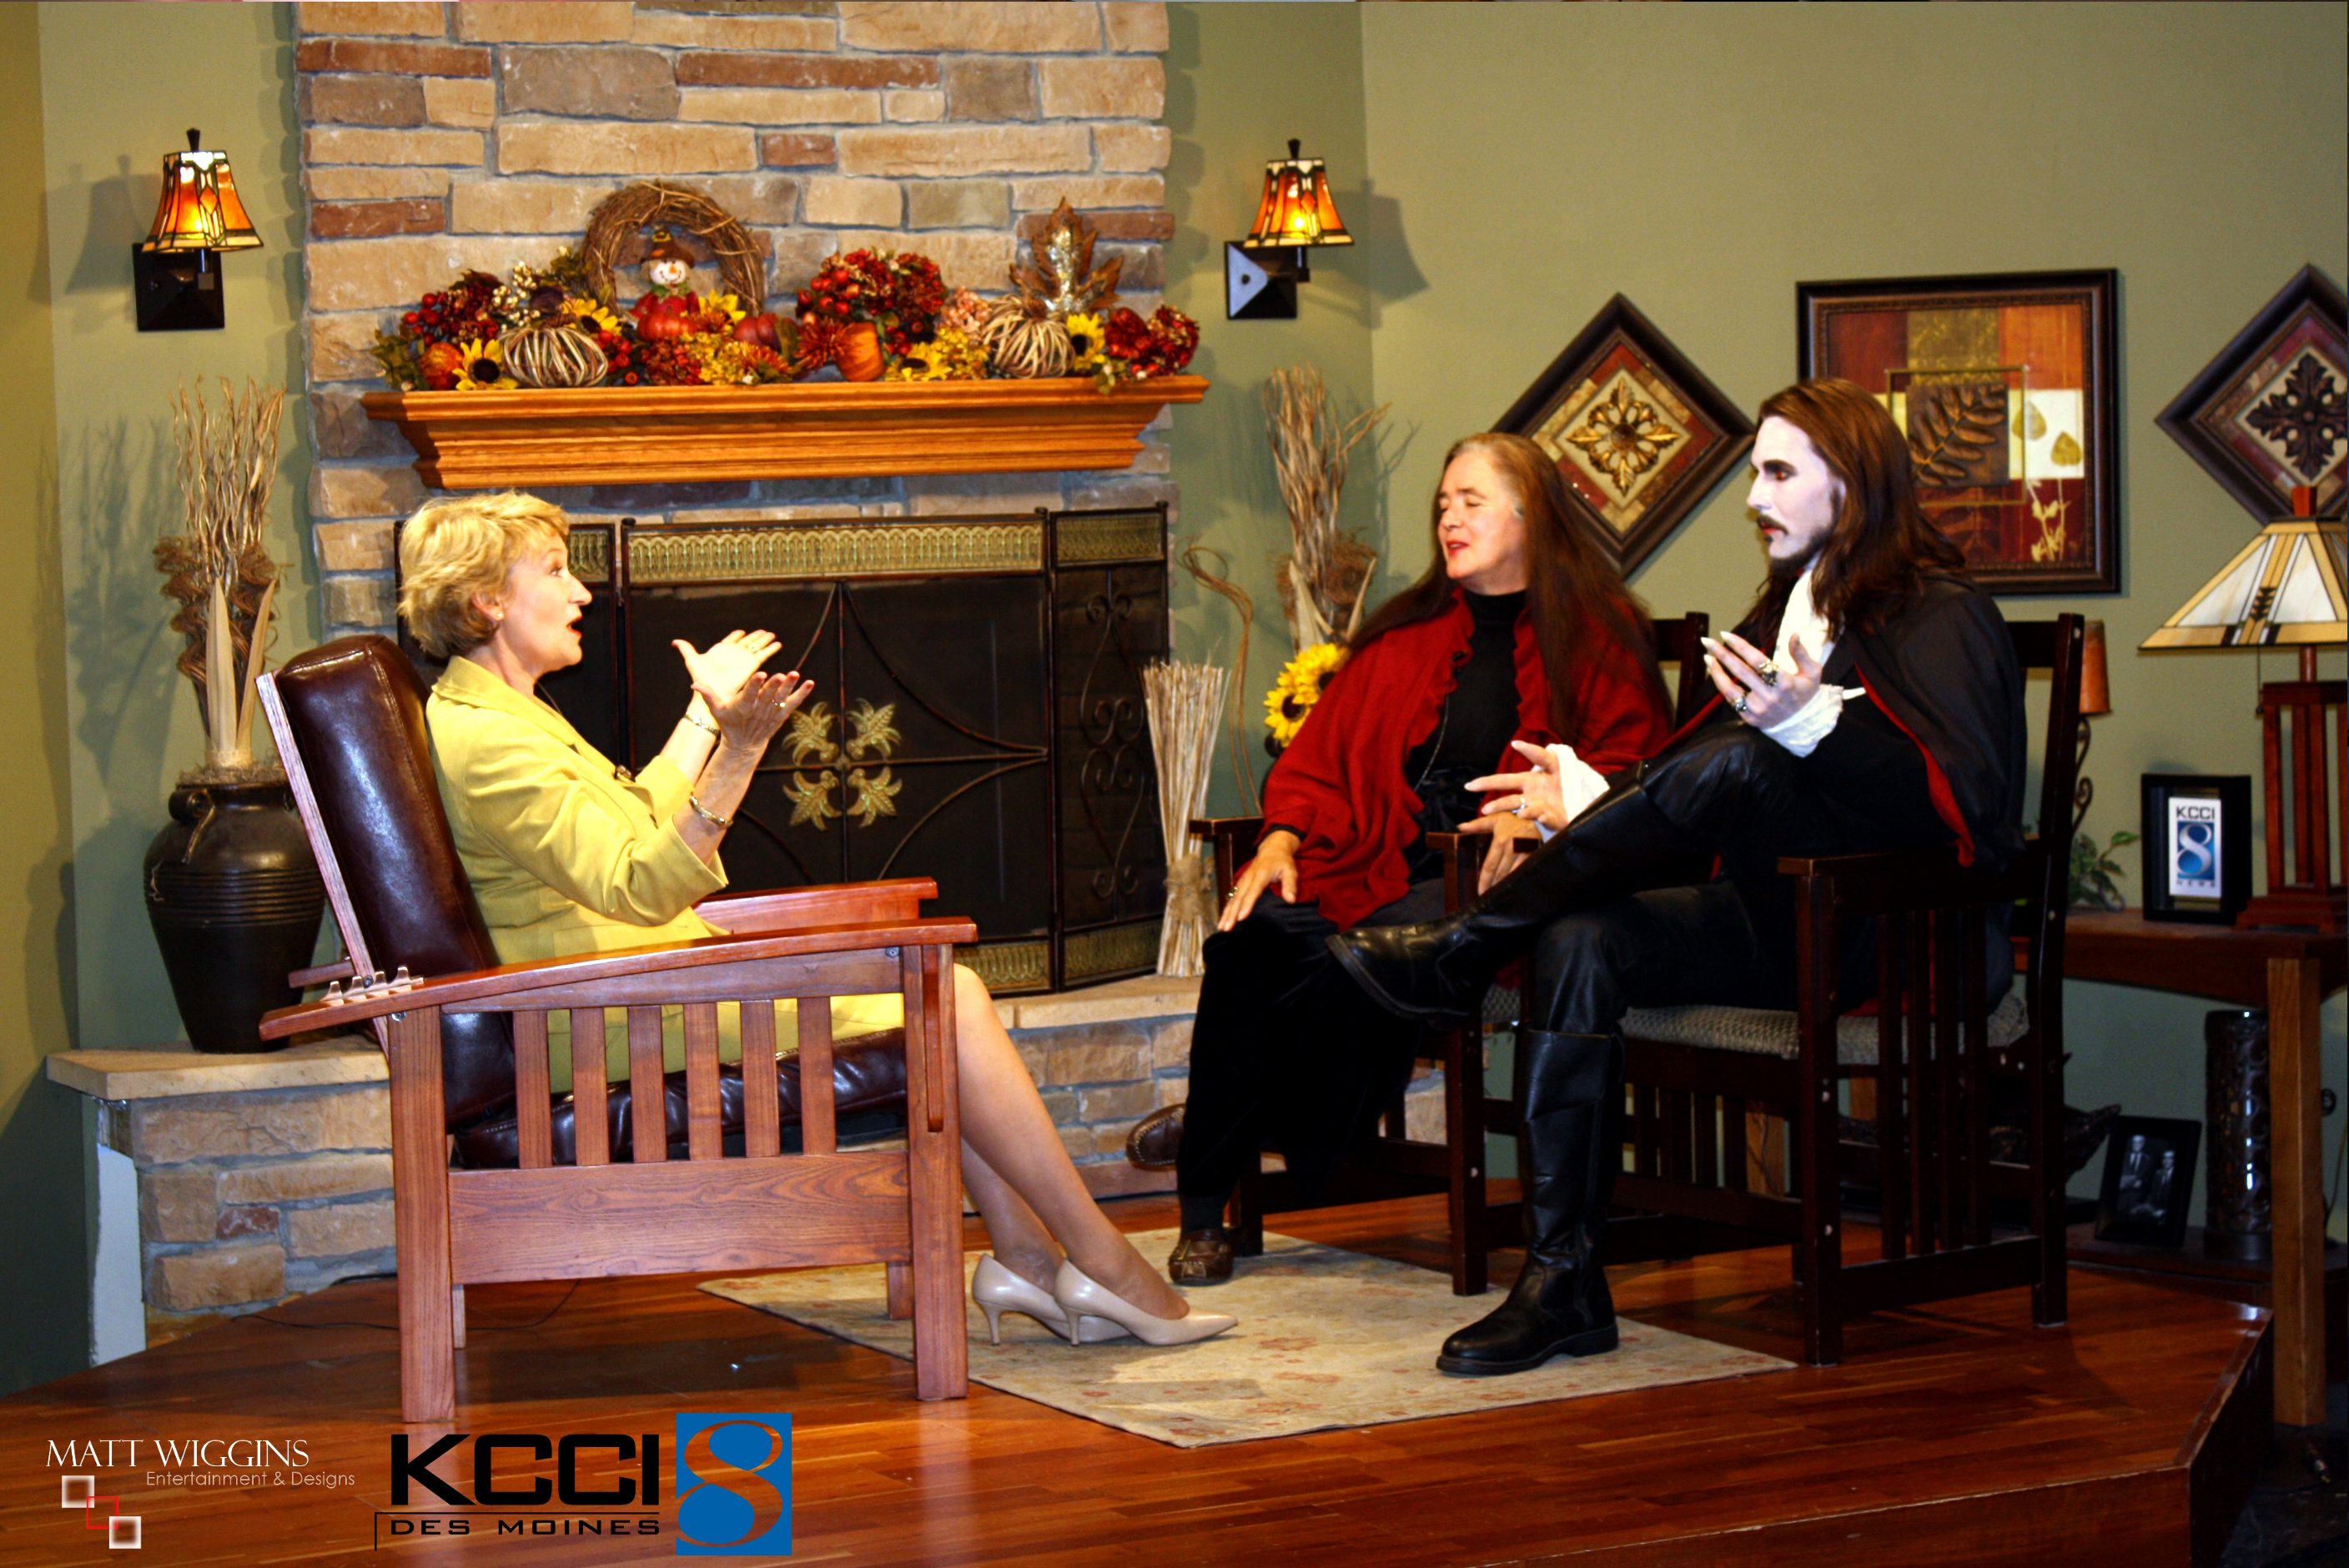 MATT WIGGINS (DRACULA)sits in for in interview with KCCI News Channel 8 in Des Moines, IA - October 2014